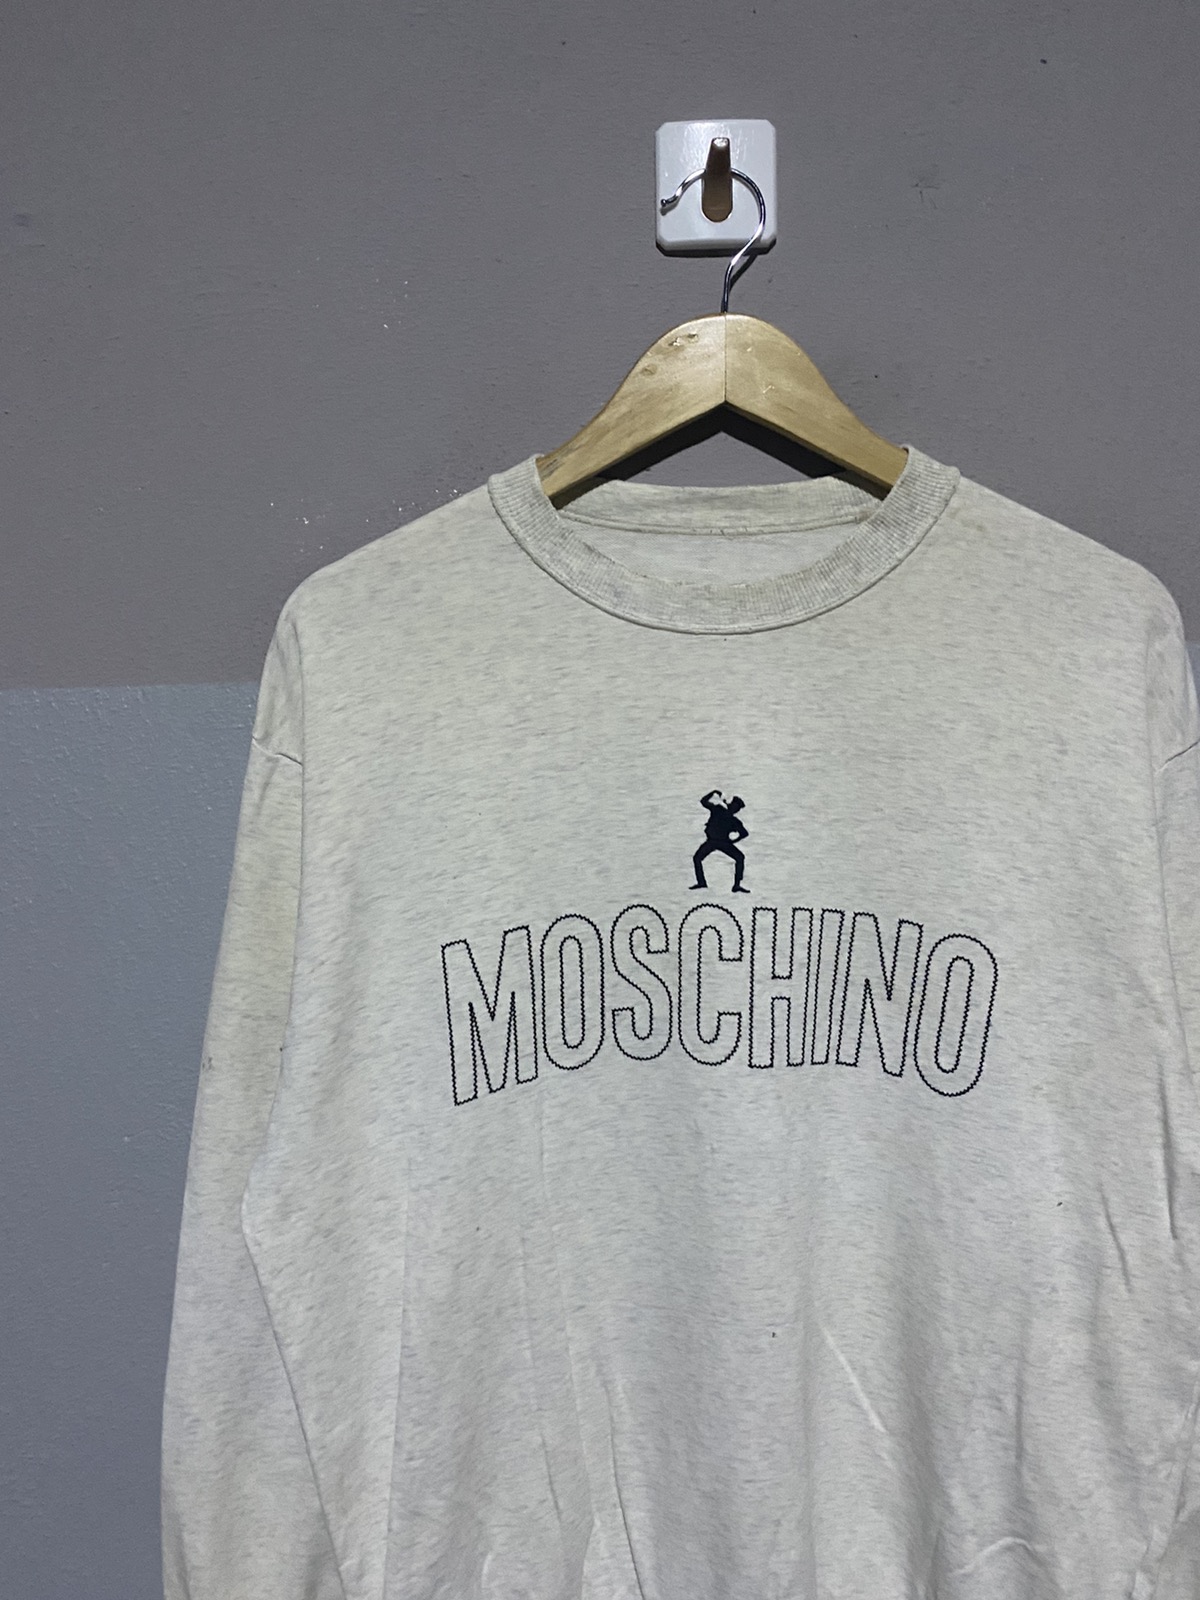 🔥SALE🔥MOSCHINO SWEATSHIRTS EMBROIDERED LOGOS MADE IN JAPAN - 4